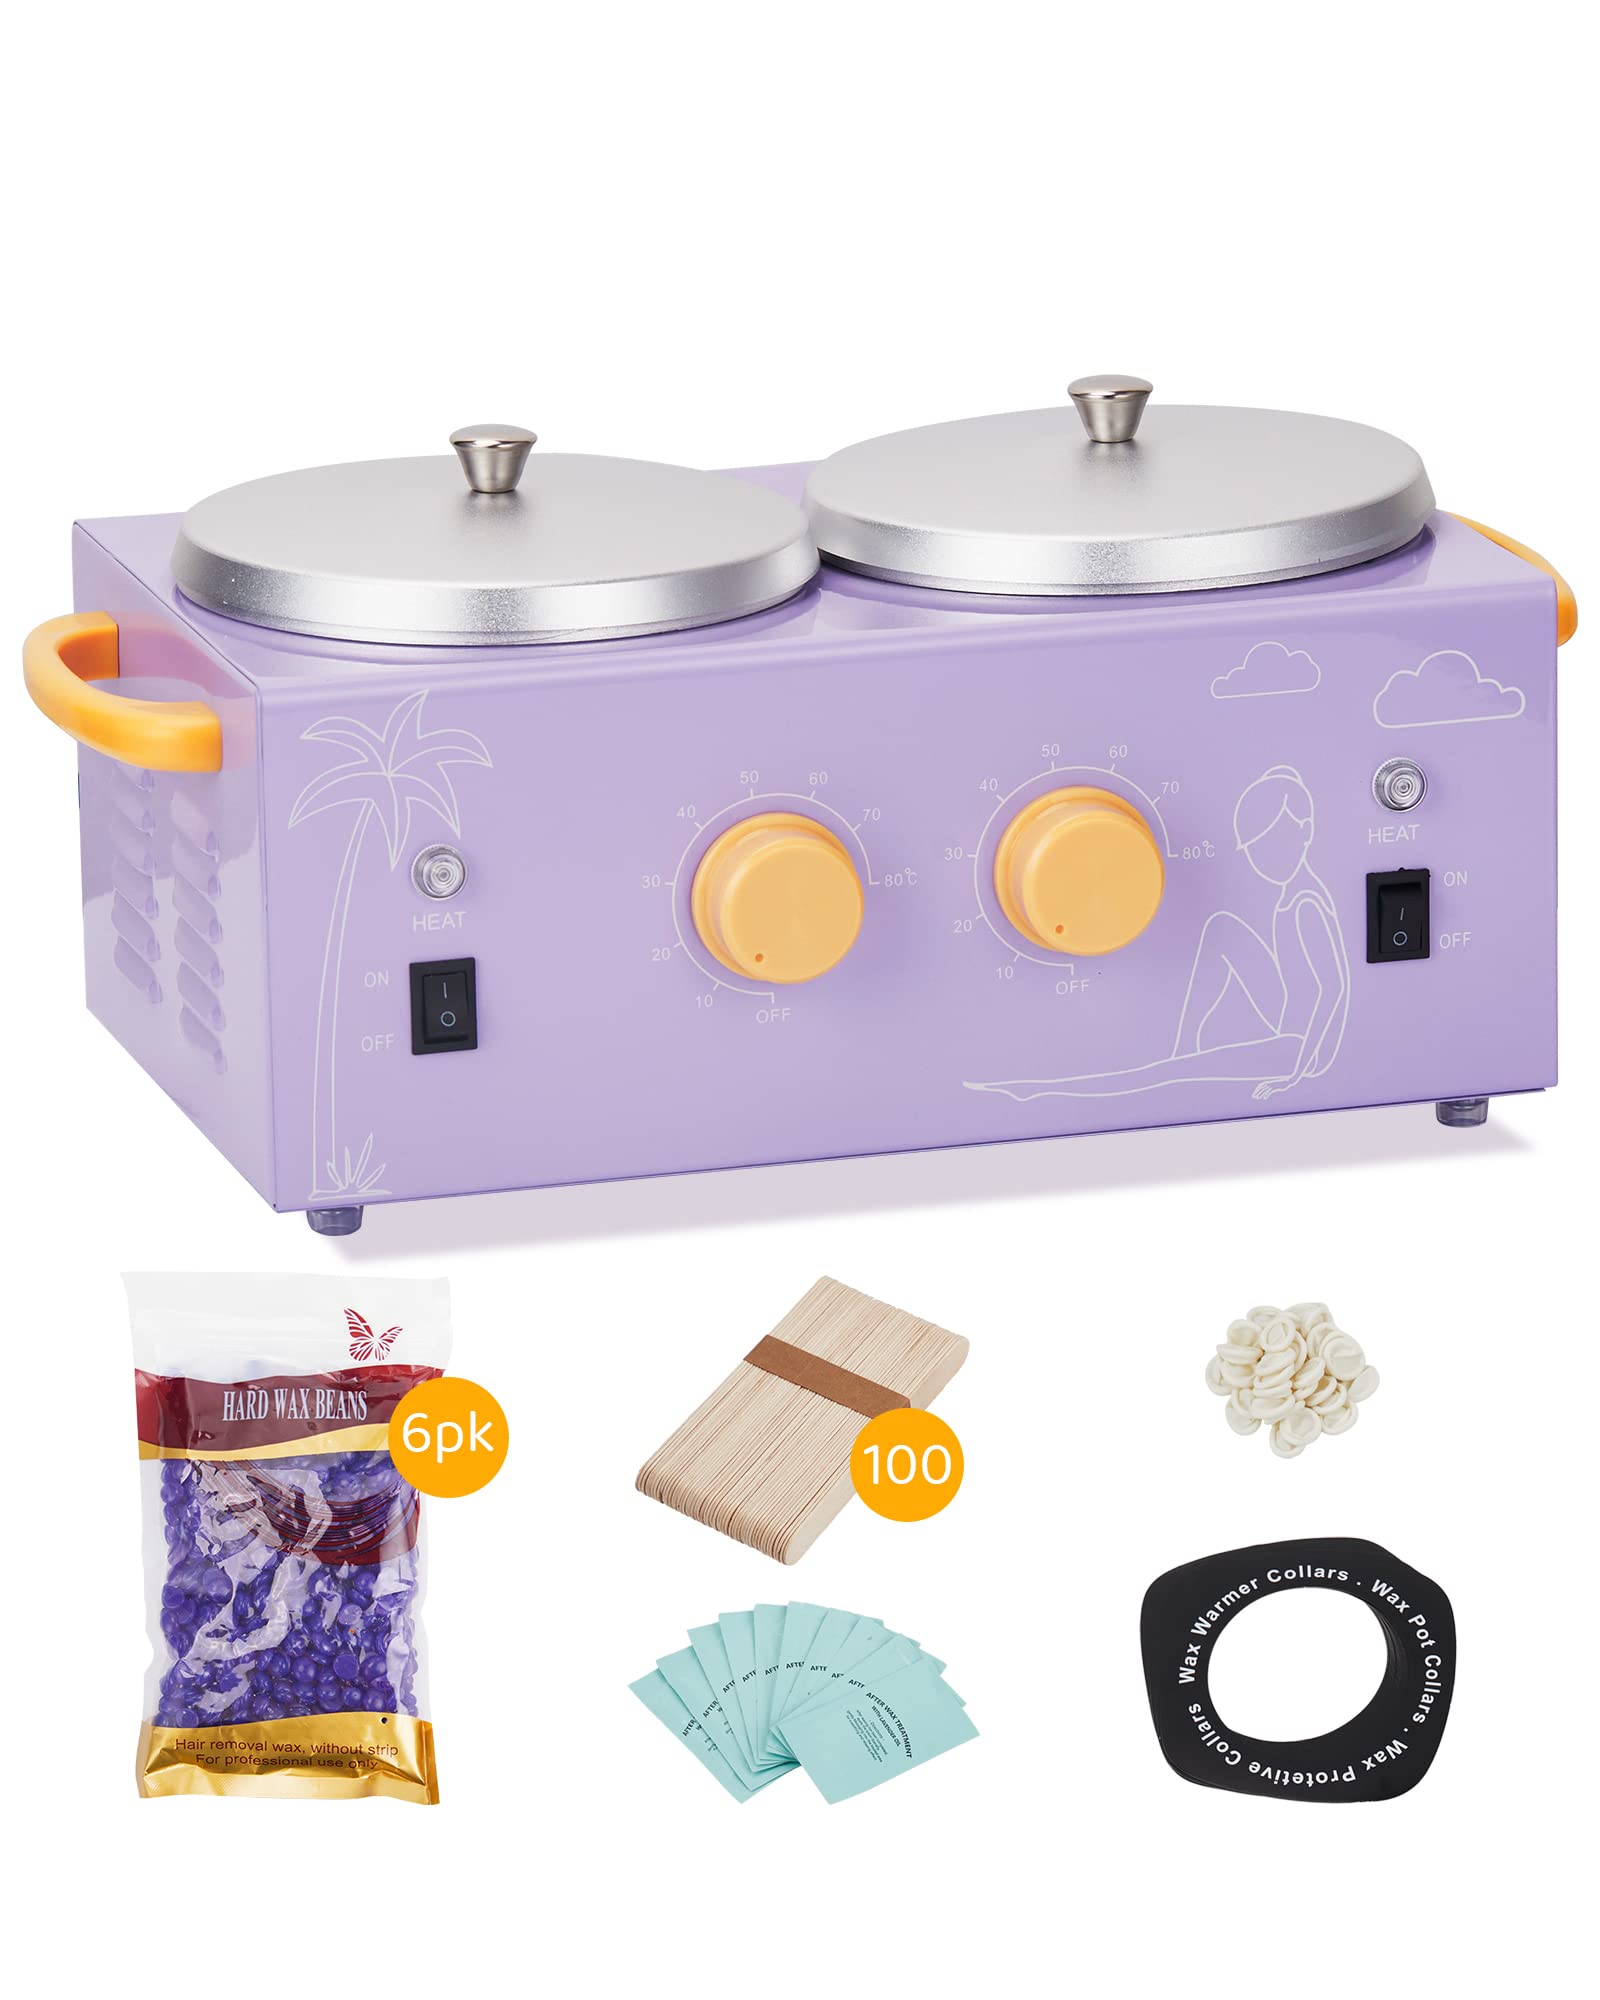 GARVEE Double Wax Pot Warmer Professional At Home Waxing Kit For All Hair Types Purple